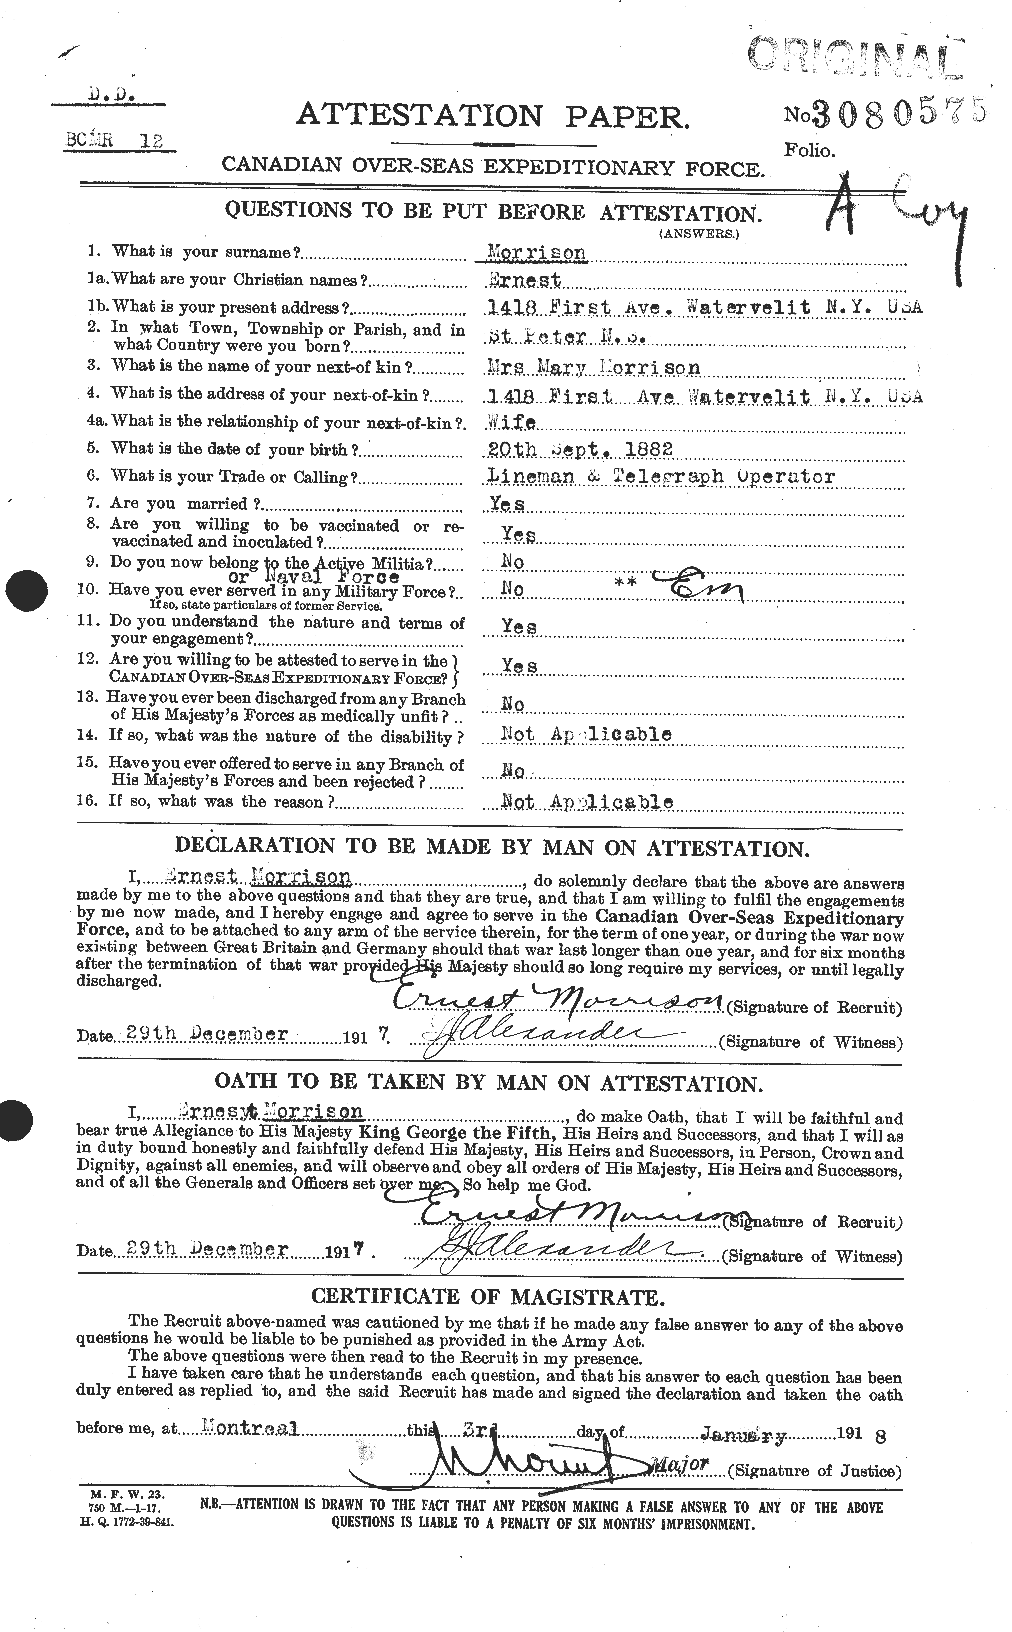 Personnel Records of the First World War - CEF 505508a